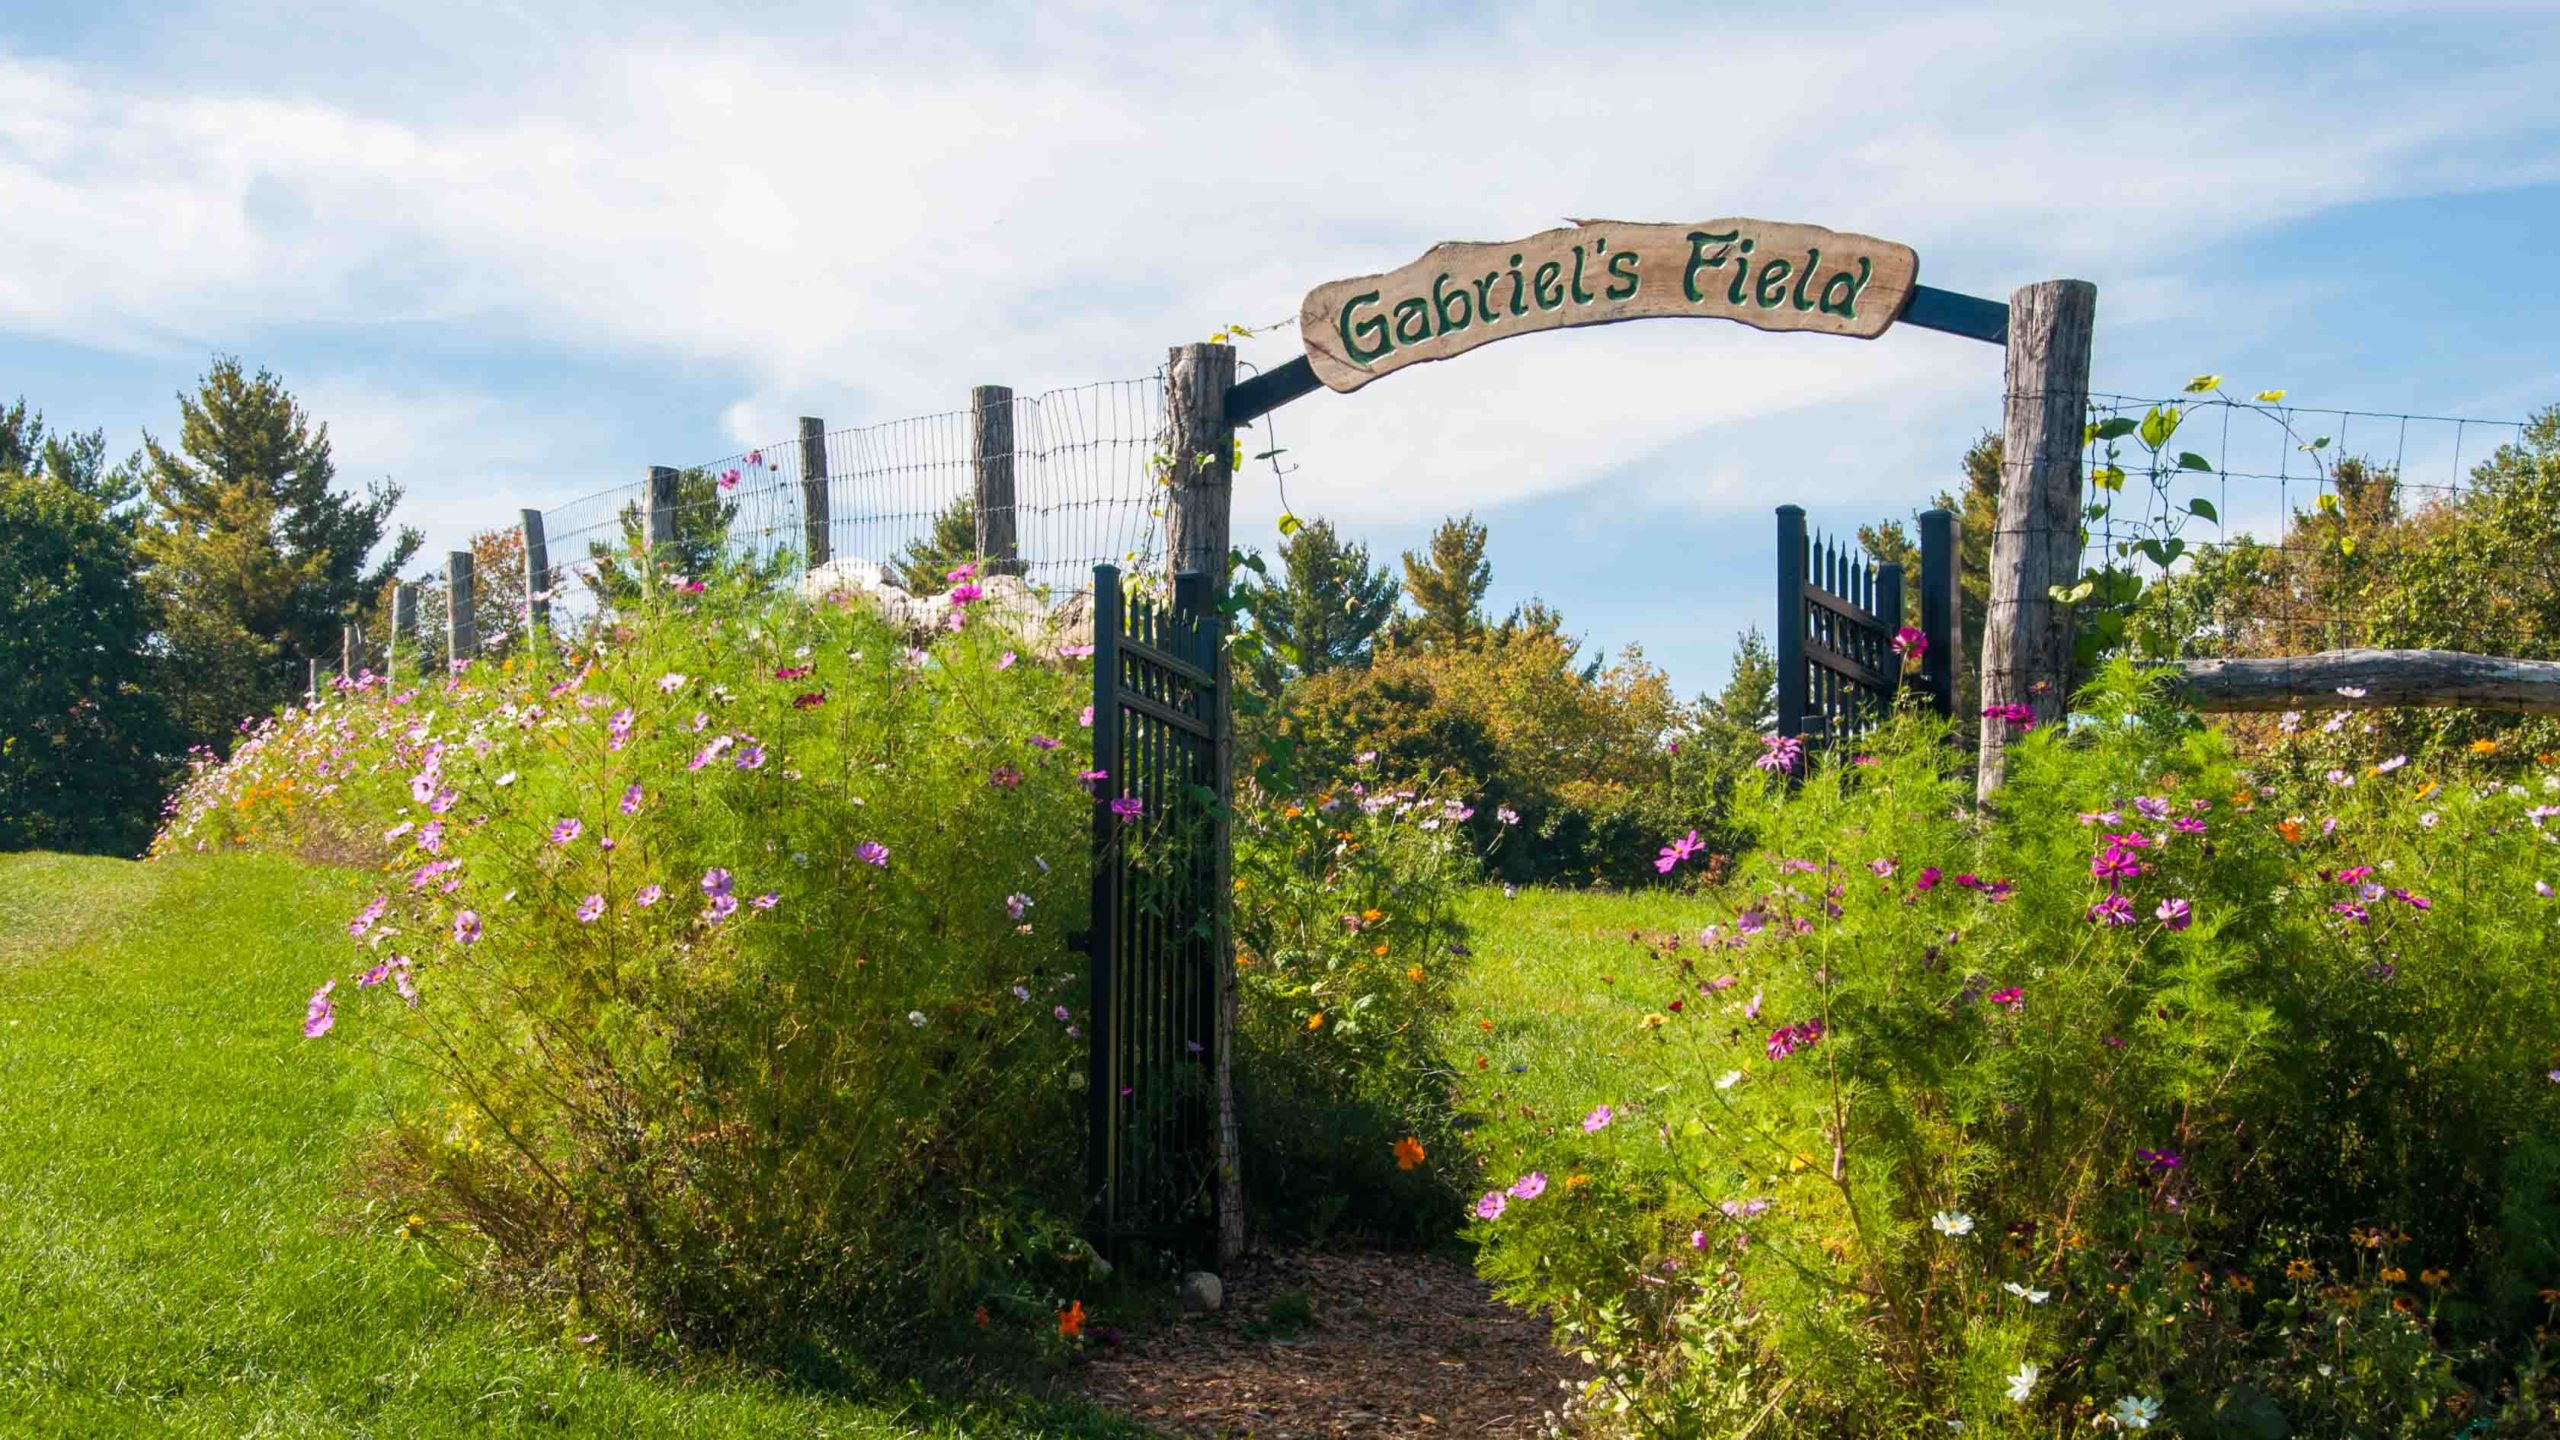 A view of the entrance to Gabriel's Field, a garden.